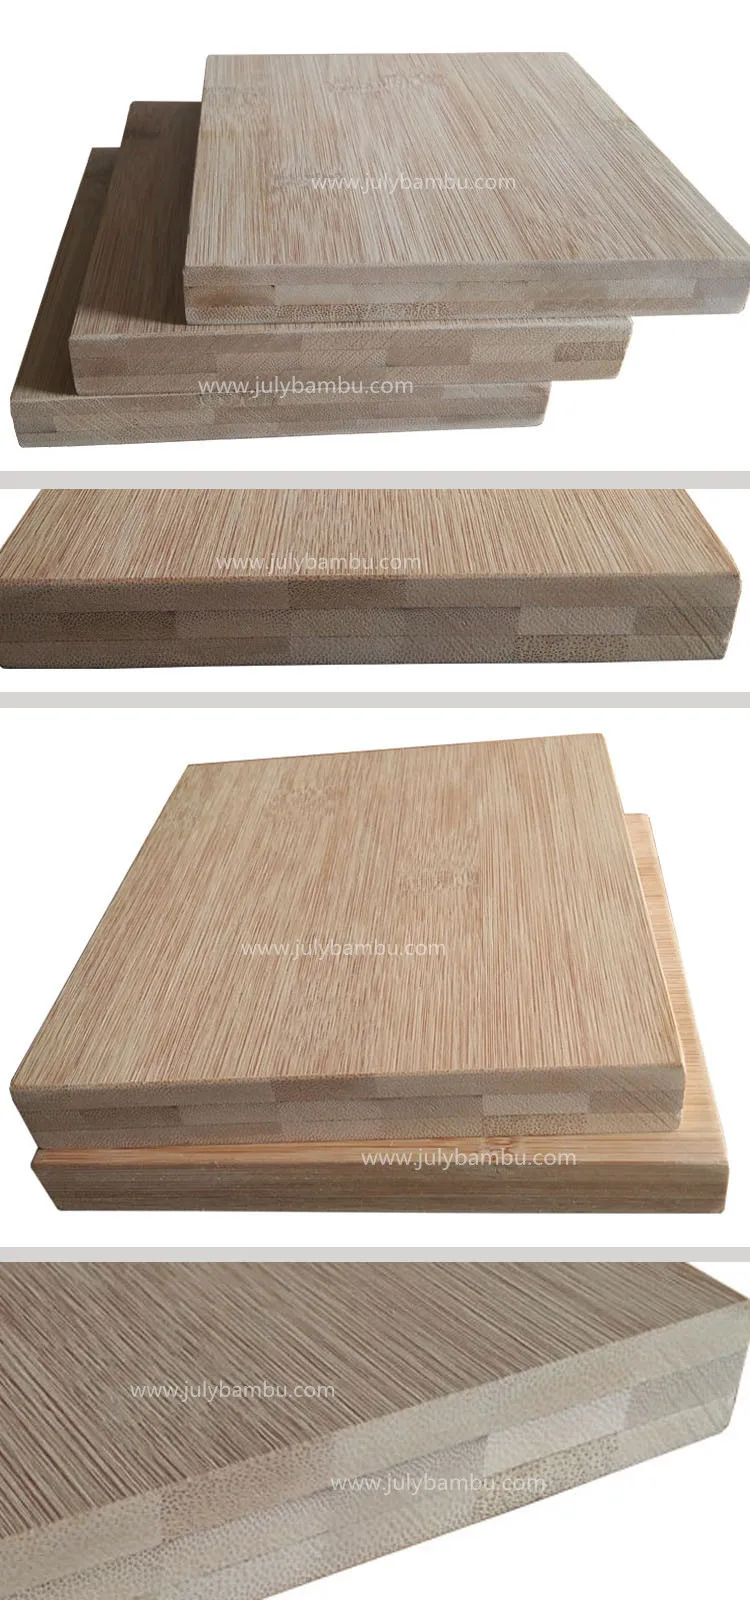 E1 Standard 12mm Bamboo Panel Wood 100 Solid Bamboo Timber Of